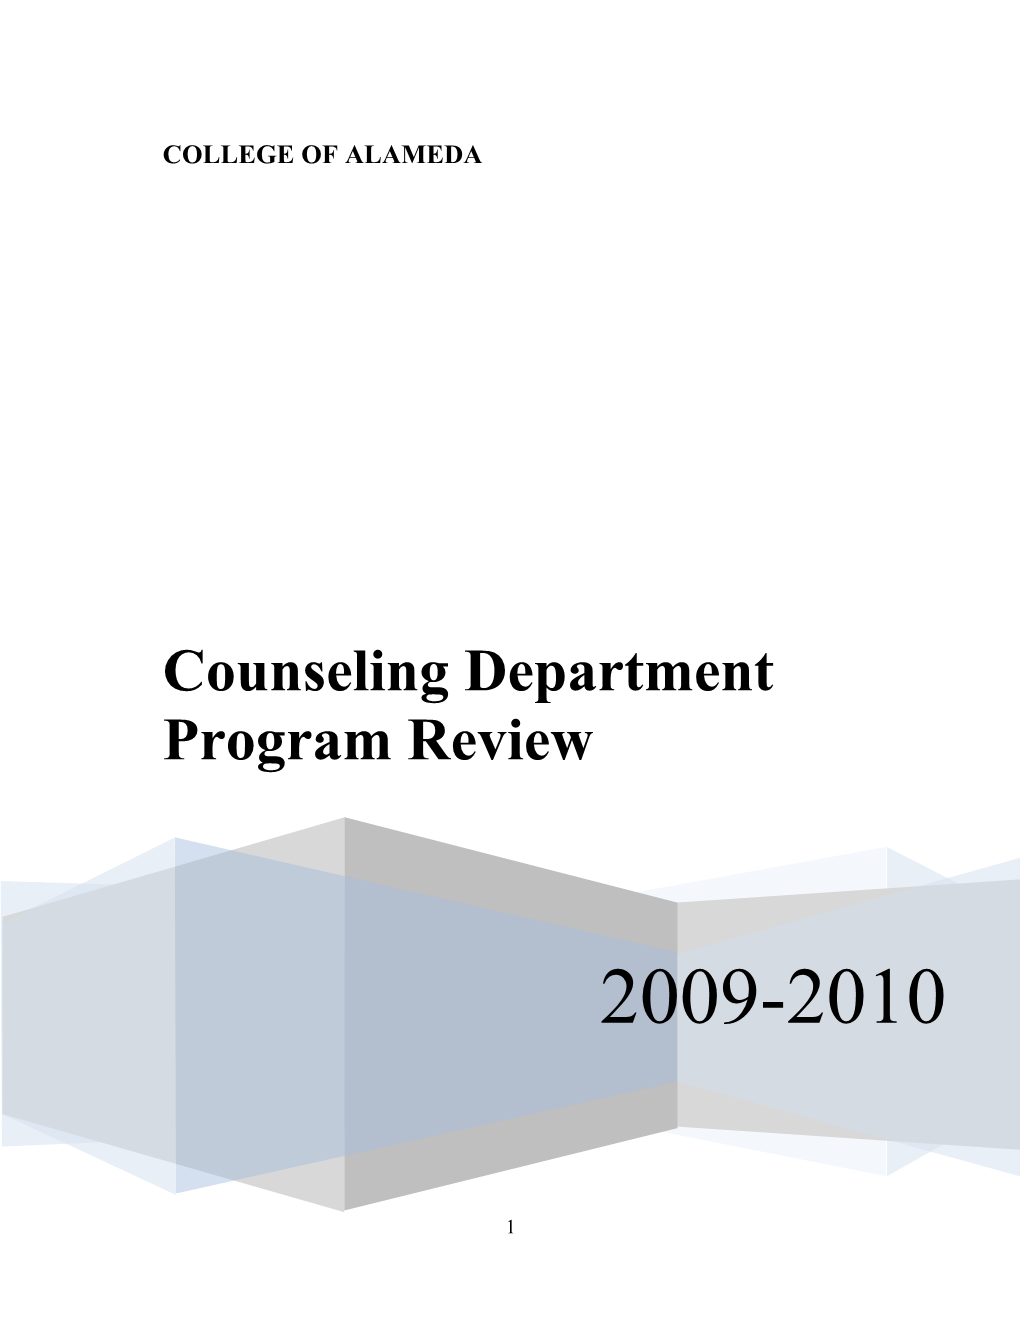 Counseling Department Program Review